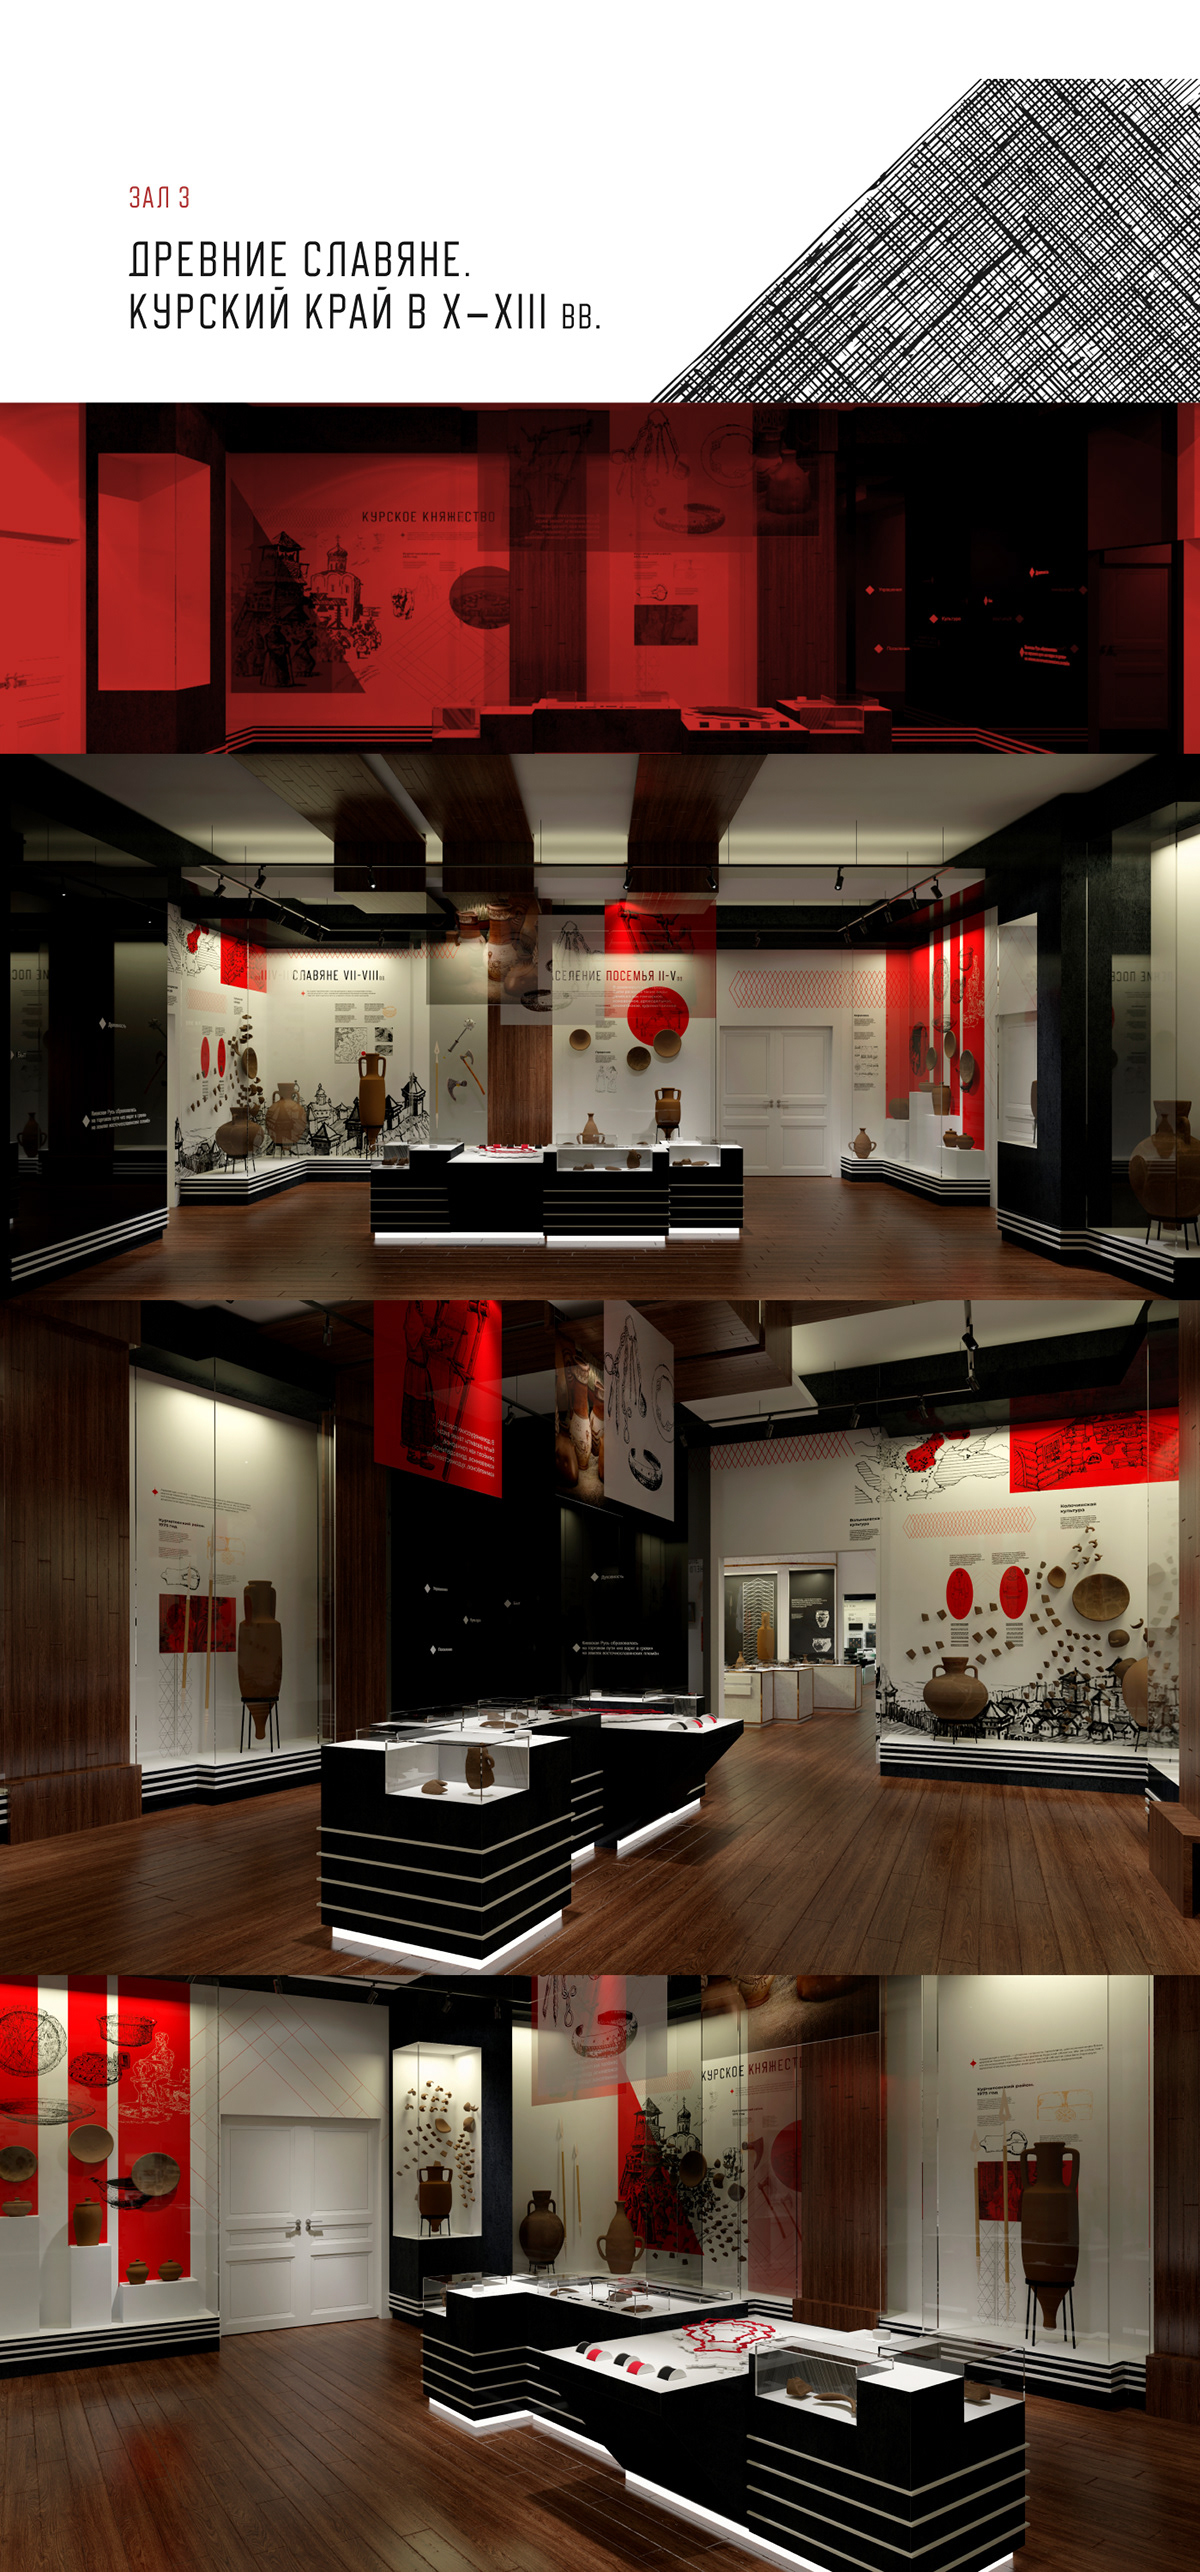 3D archeology architecture culture Exhibition  history infographic information design Layout museum